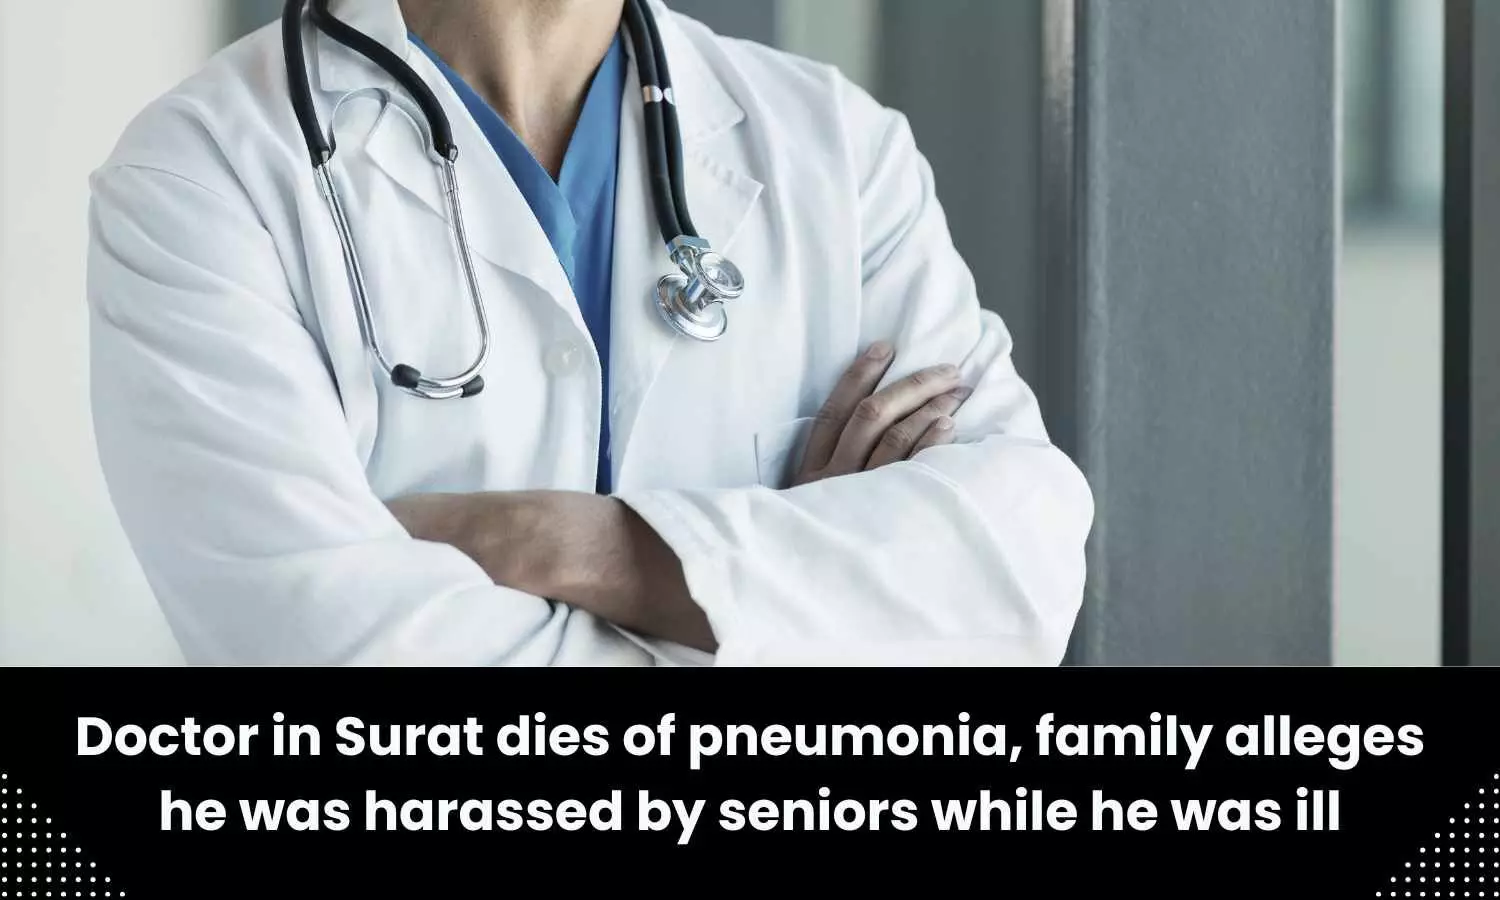 Death of PG medico, family alleges harassment by seniors